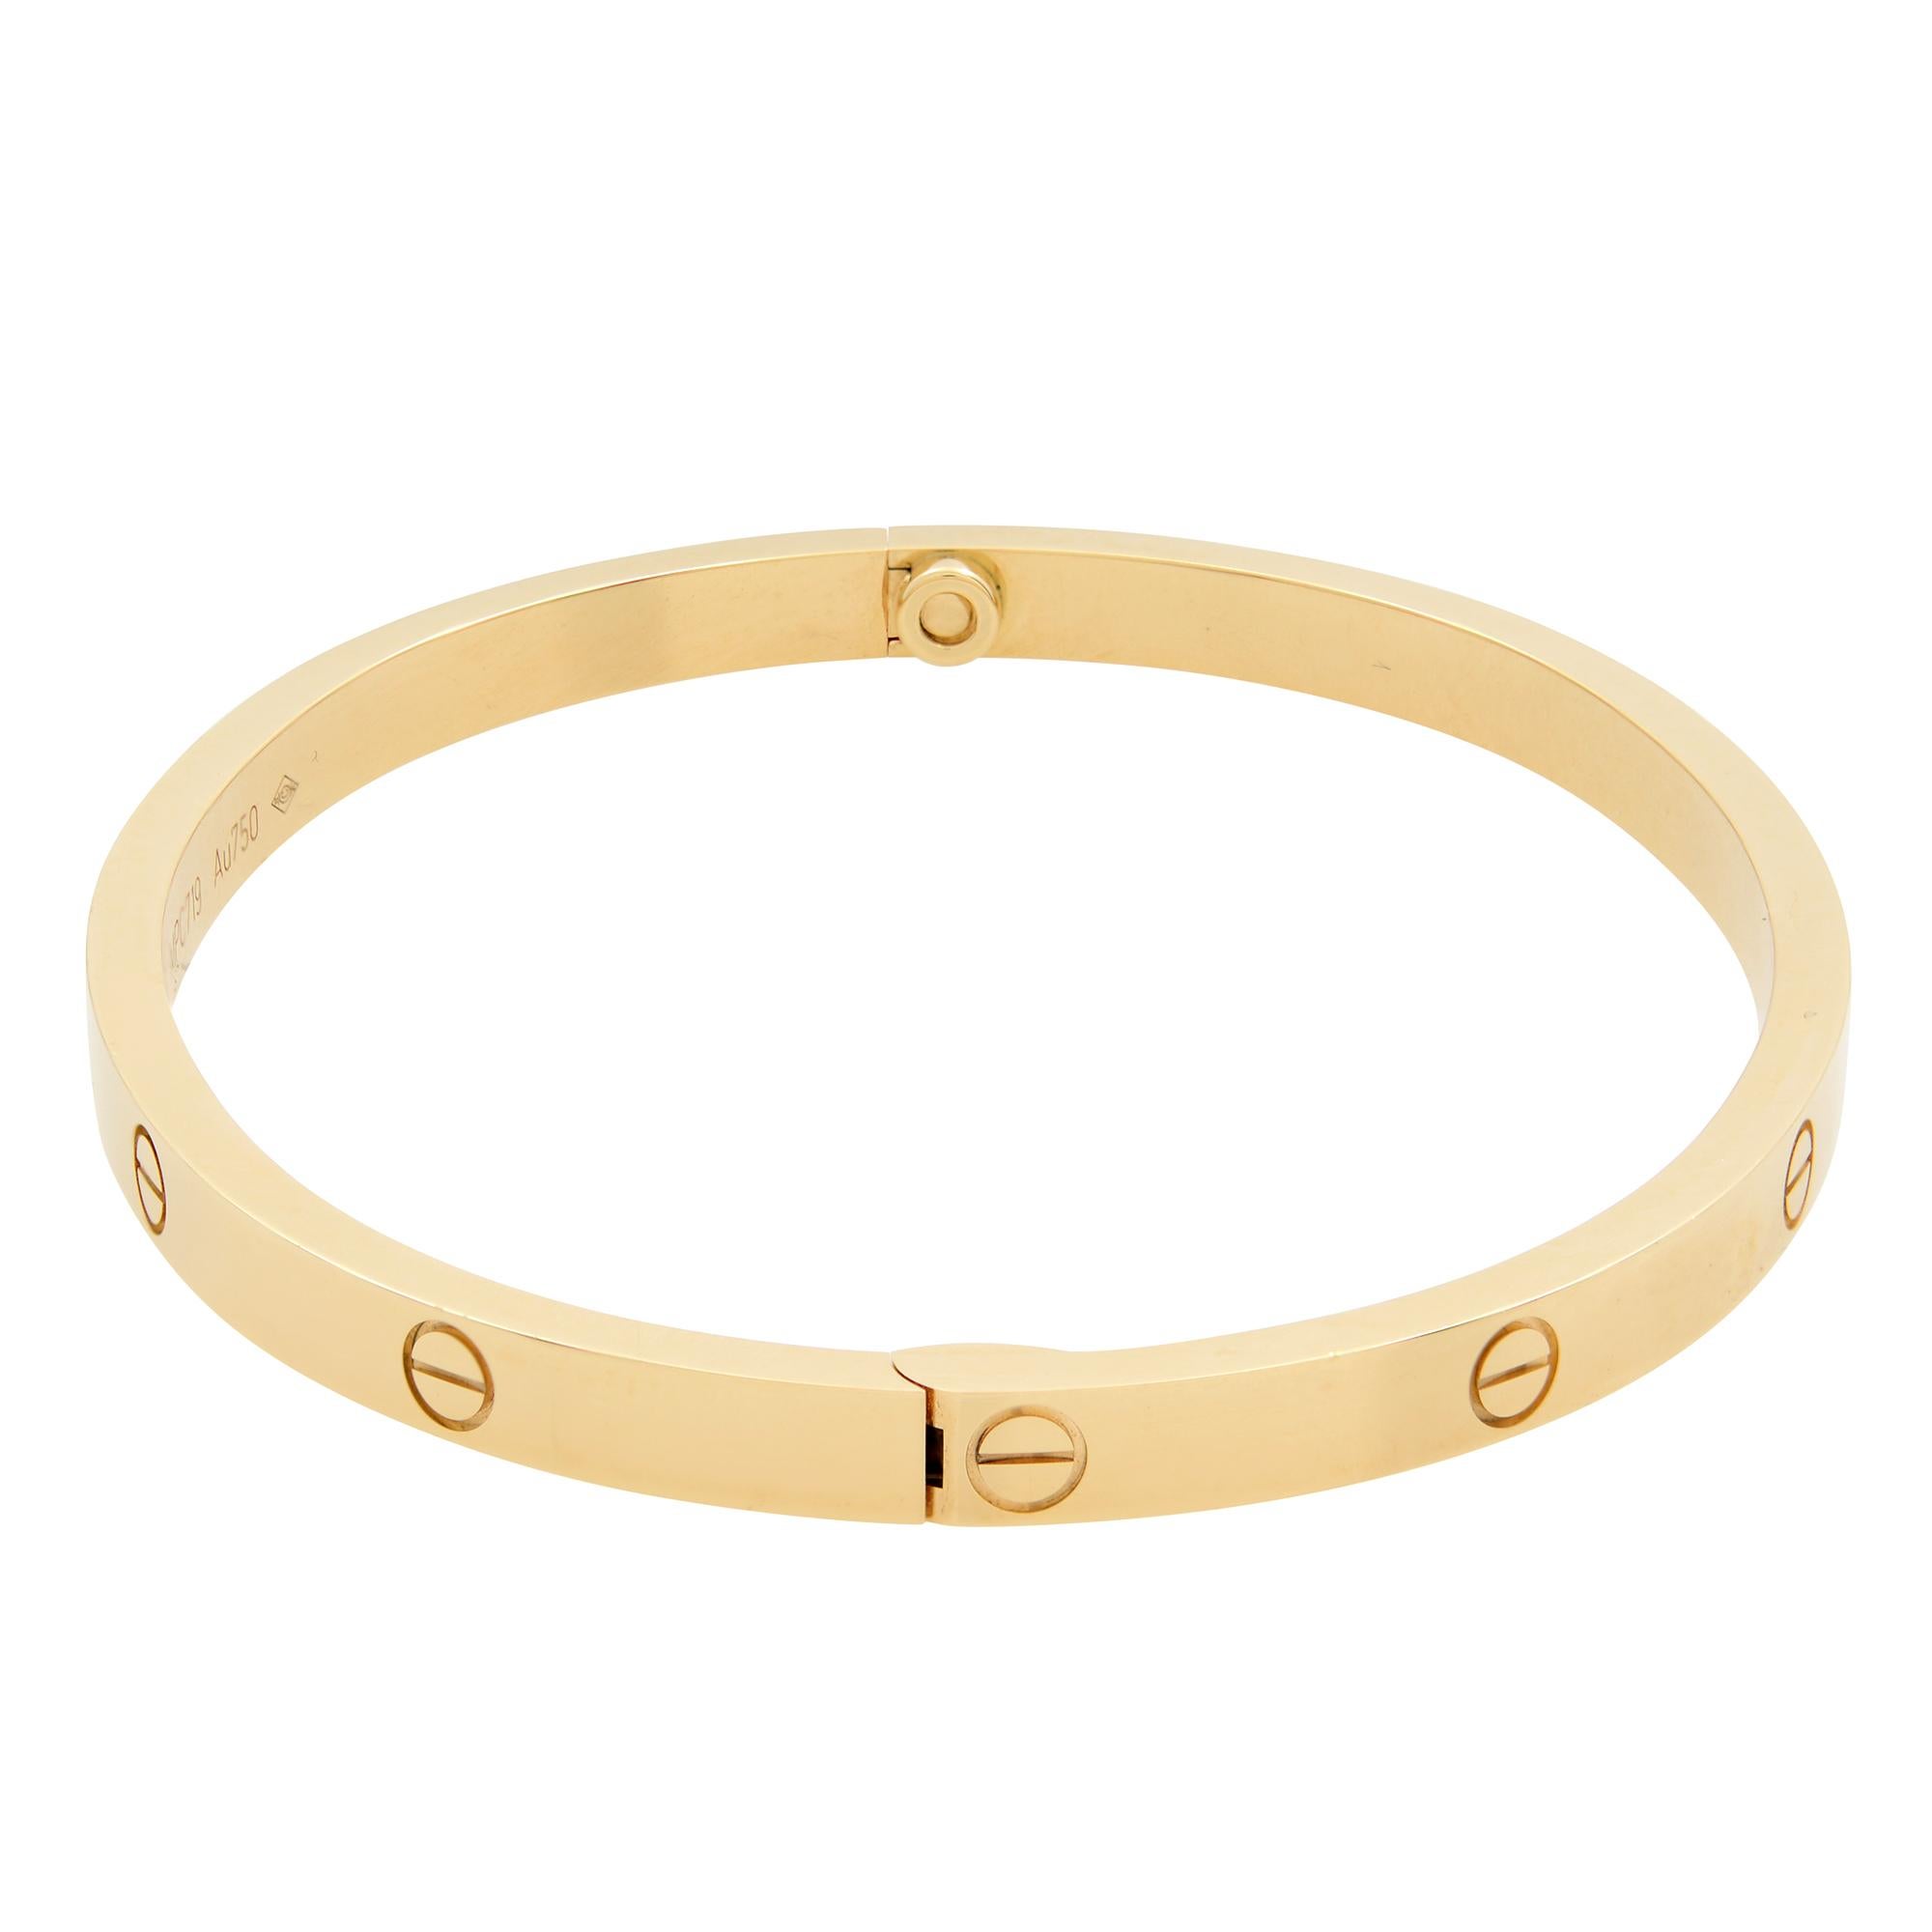  Cartier Love bracelet in 18K yellow gold, small model. Width: 3.65mm. Size 16. Excellent pre-owned condition. Comes with original box, papers and a screwdriver.